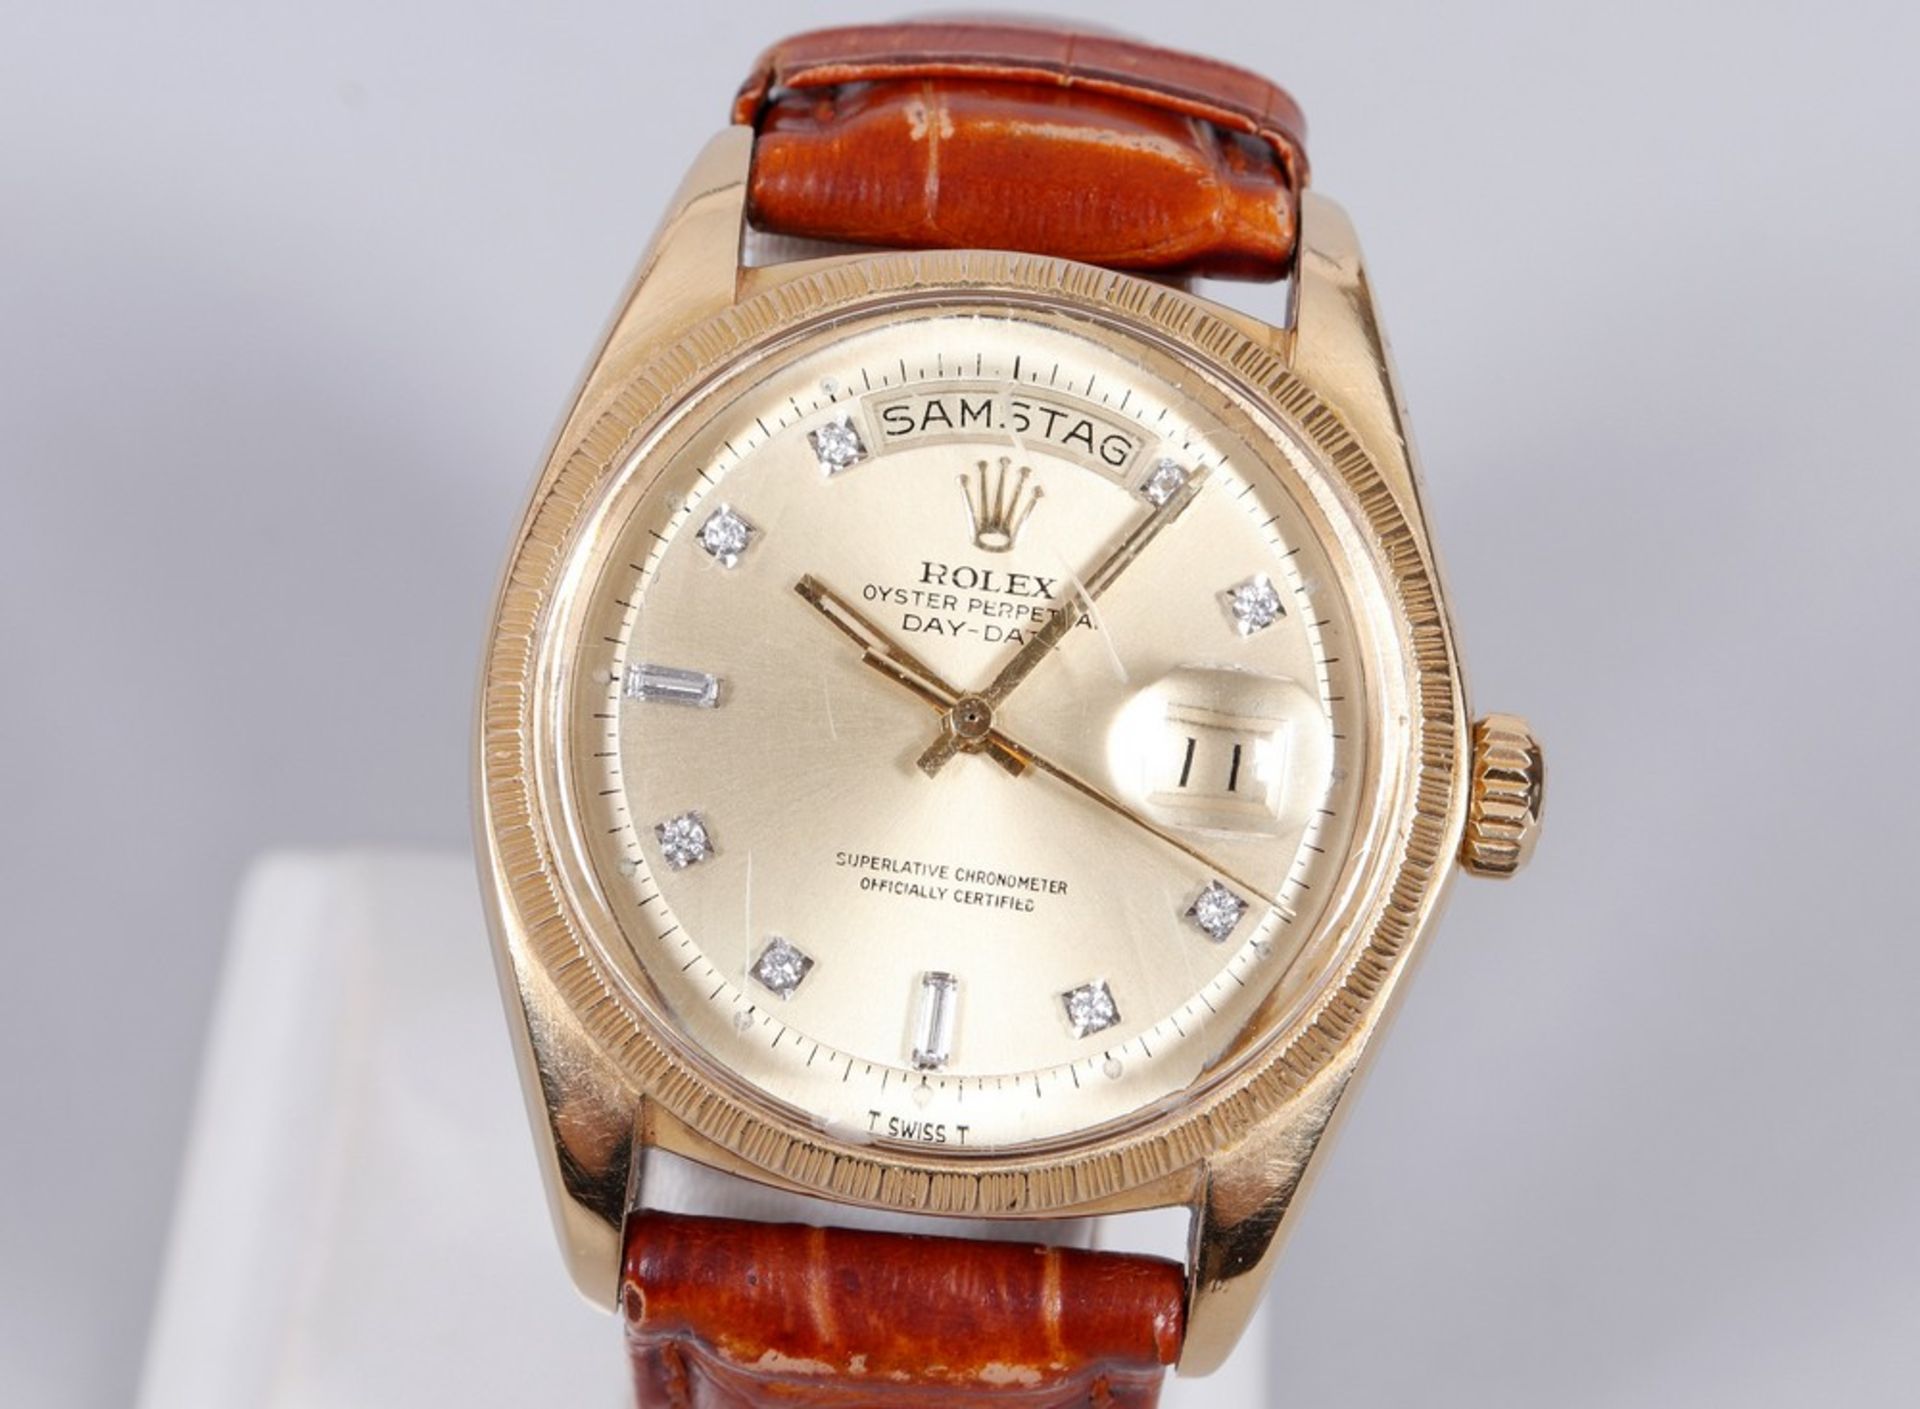 Rolex Day Date, 750 gold, reference 1807, pie pan dial - Image 2 of 5